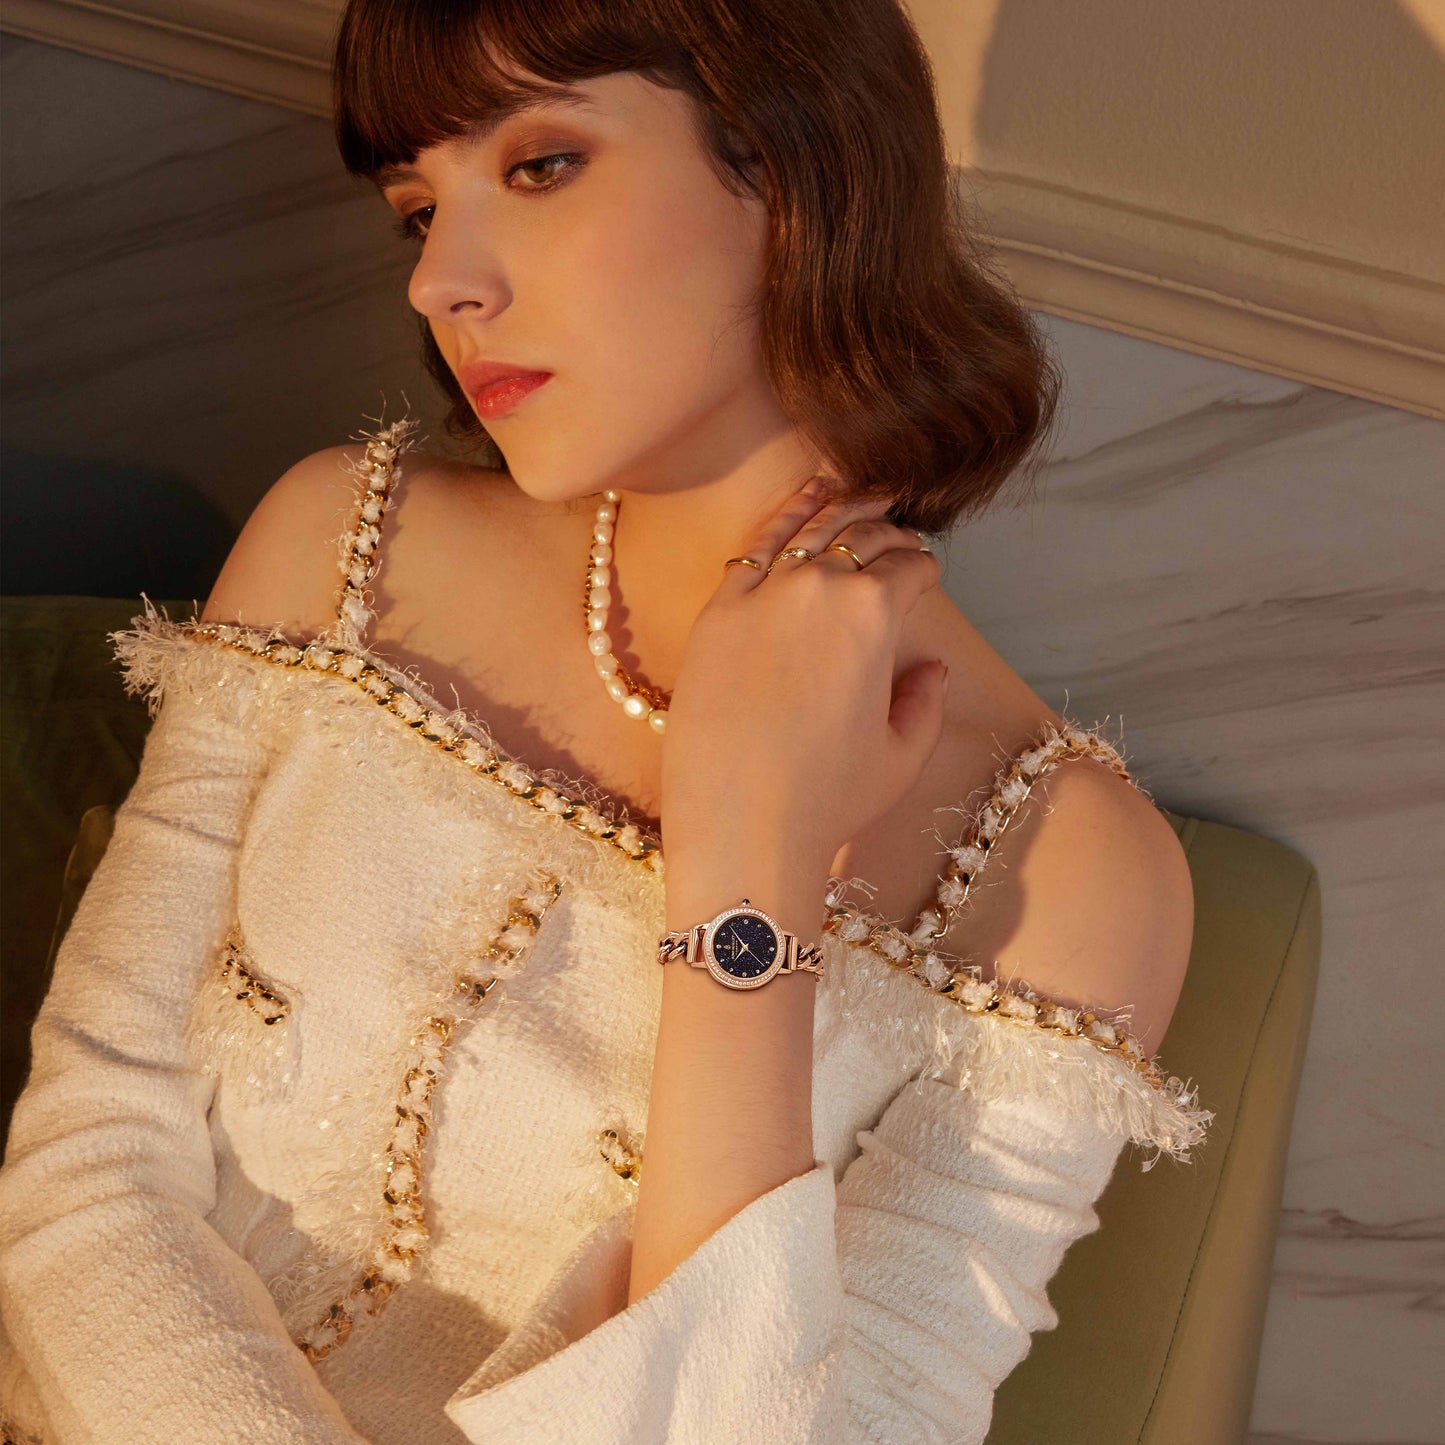 Princess Starry Sky Watch with the 2nd Watch Dial